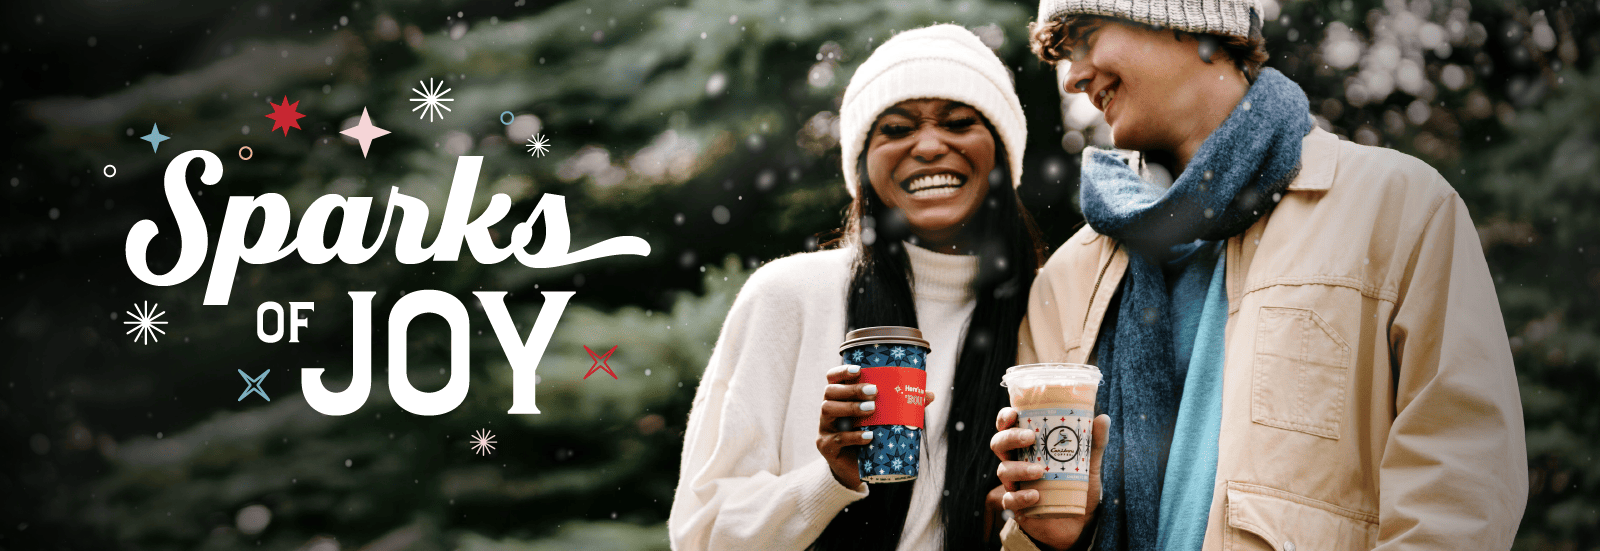 Sparks Joy. Two people smiling and holding caribou coffee.